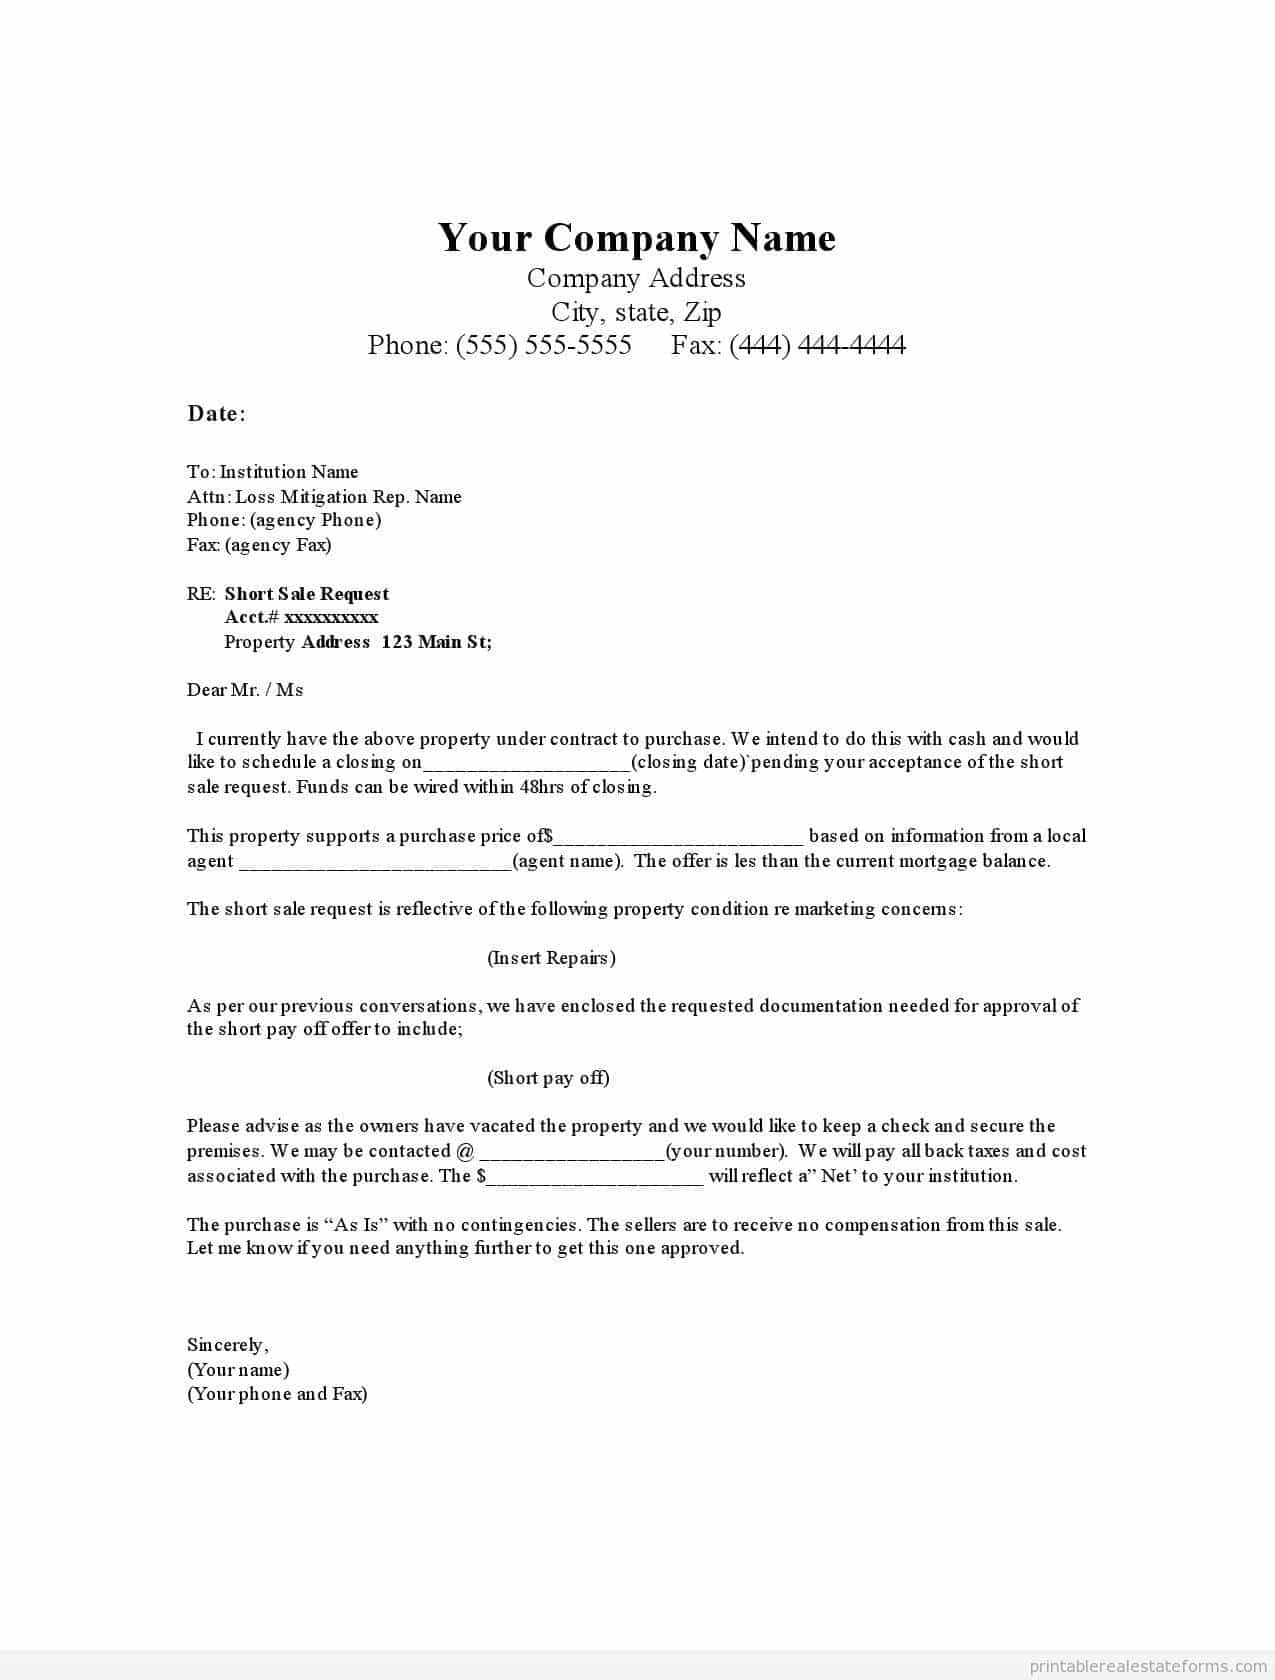 Real estate buyer information sheet template and commercial real estate lead sheet